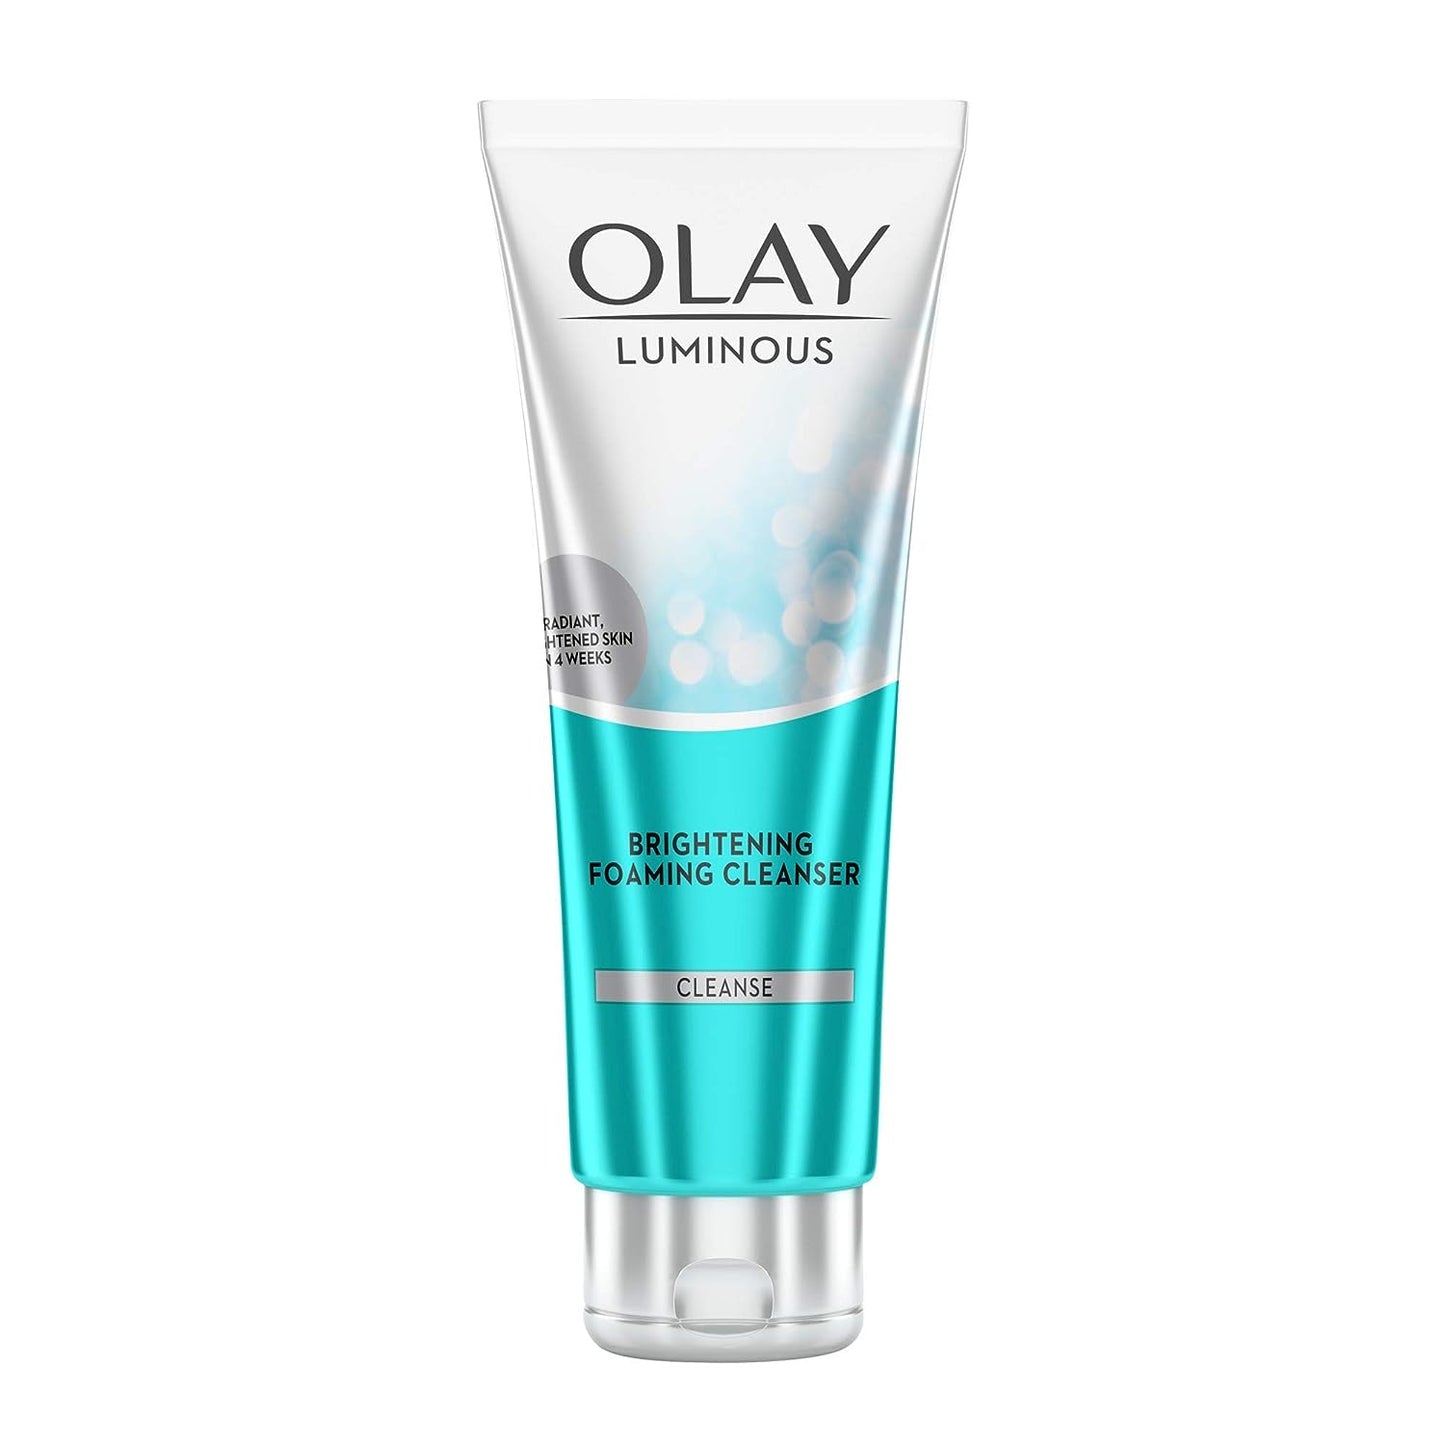 Olay Luminous Brightening Foaming Cleanser Face Wash, 100 g